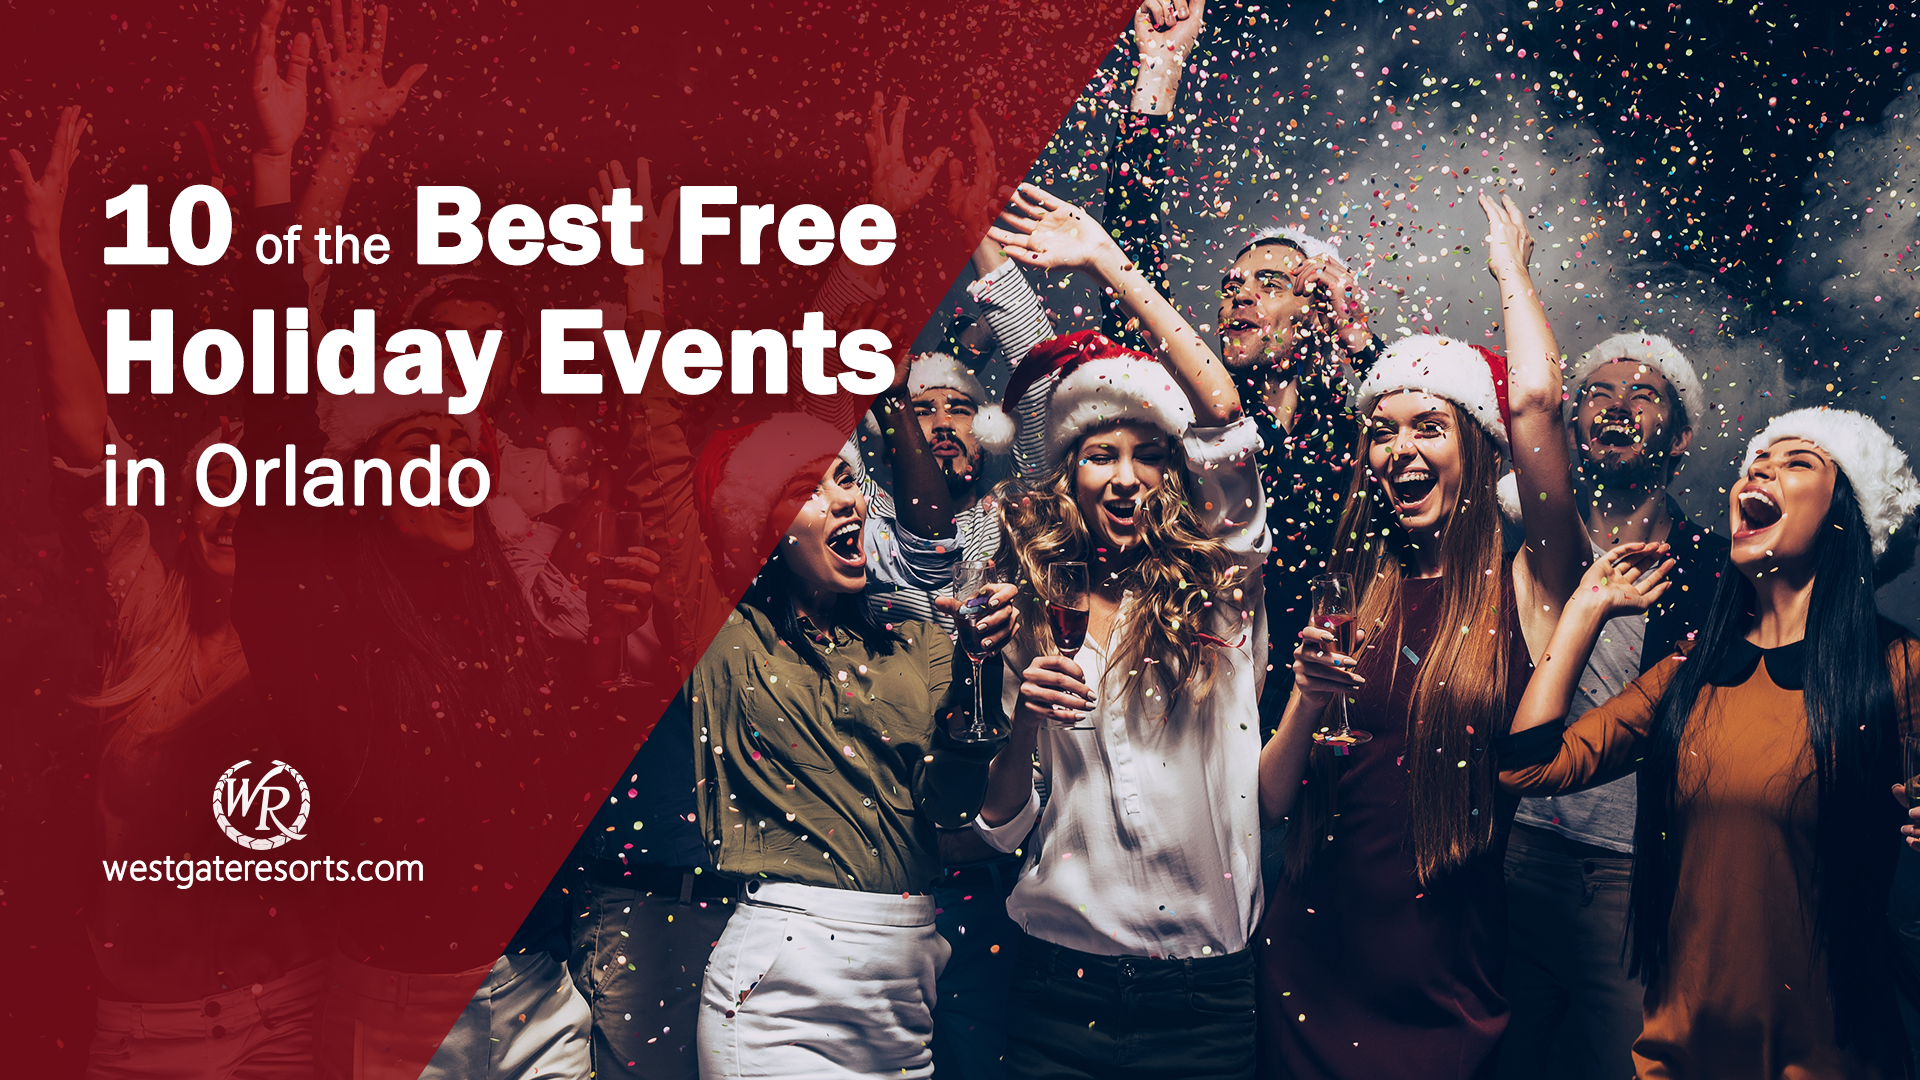 10 of the Best Free Christmas Events in Orlando | Free Things to Do in Orlando Florida for Families